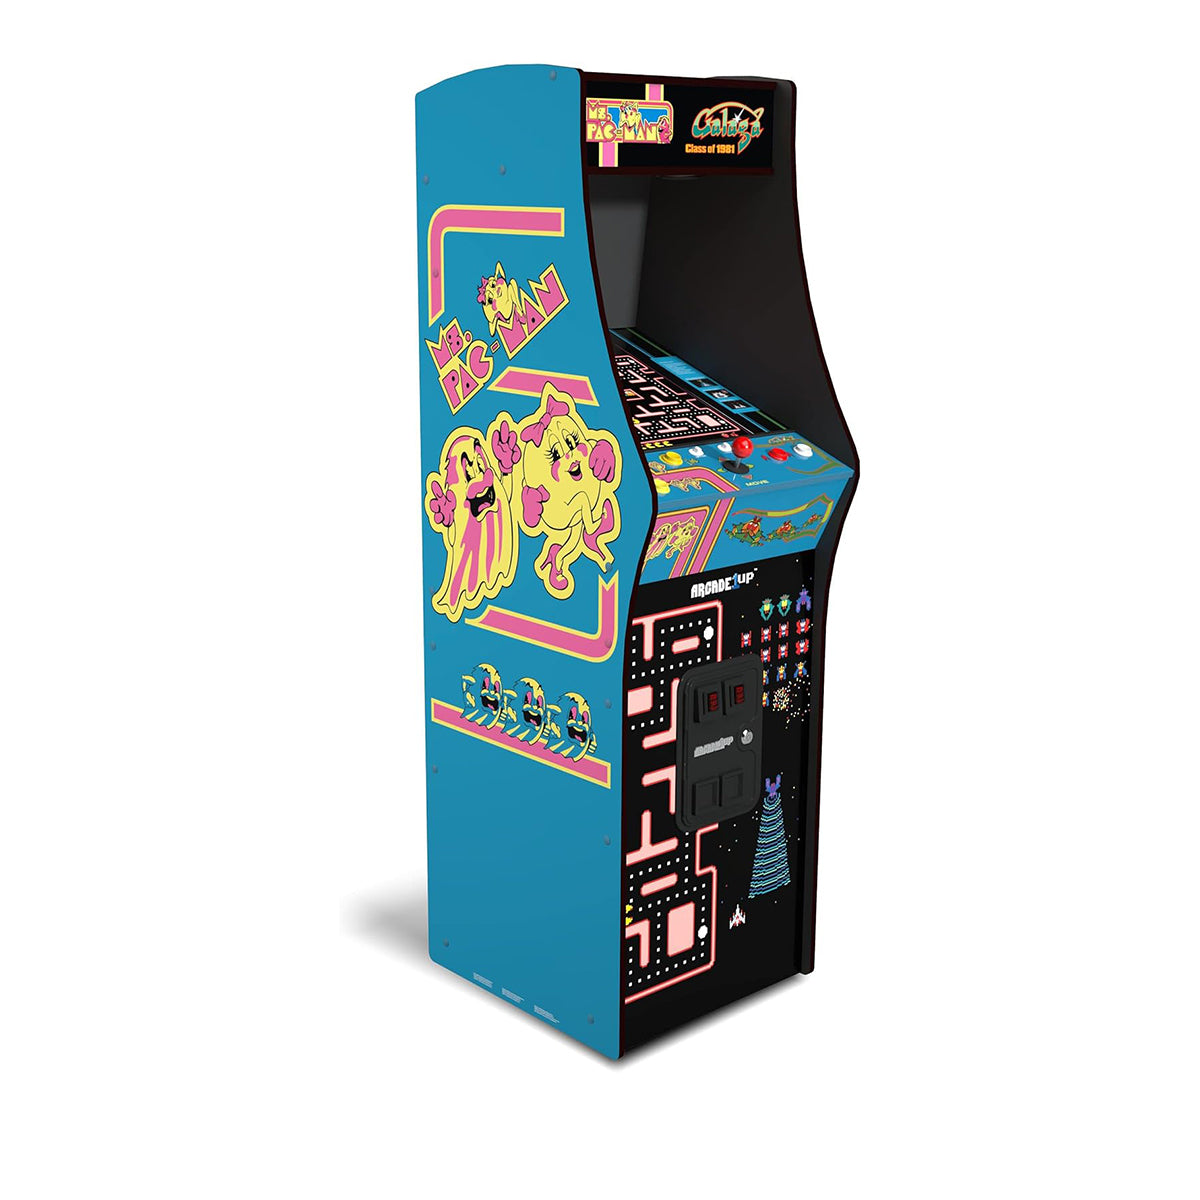 Arcade 1Up Class of 81' Deluxe Arcade Game